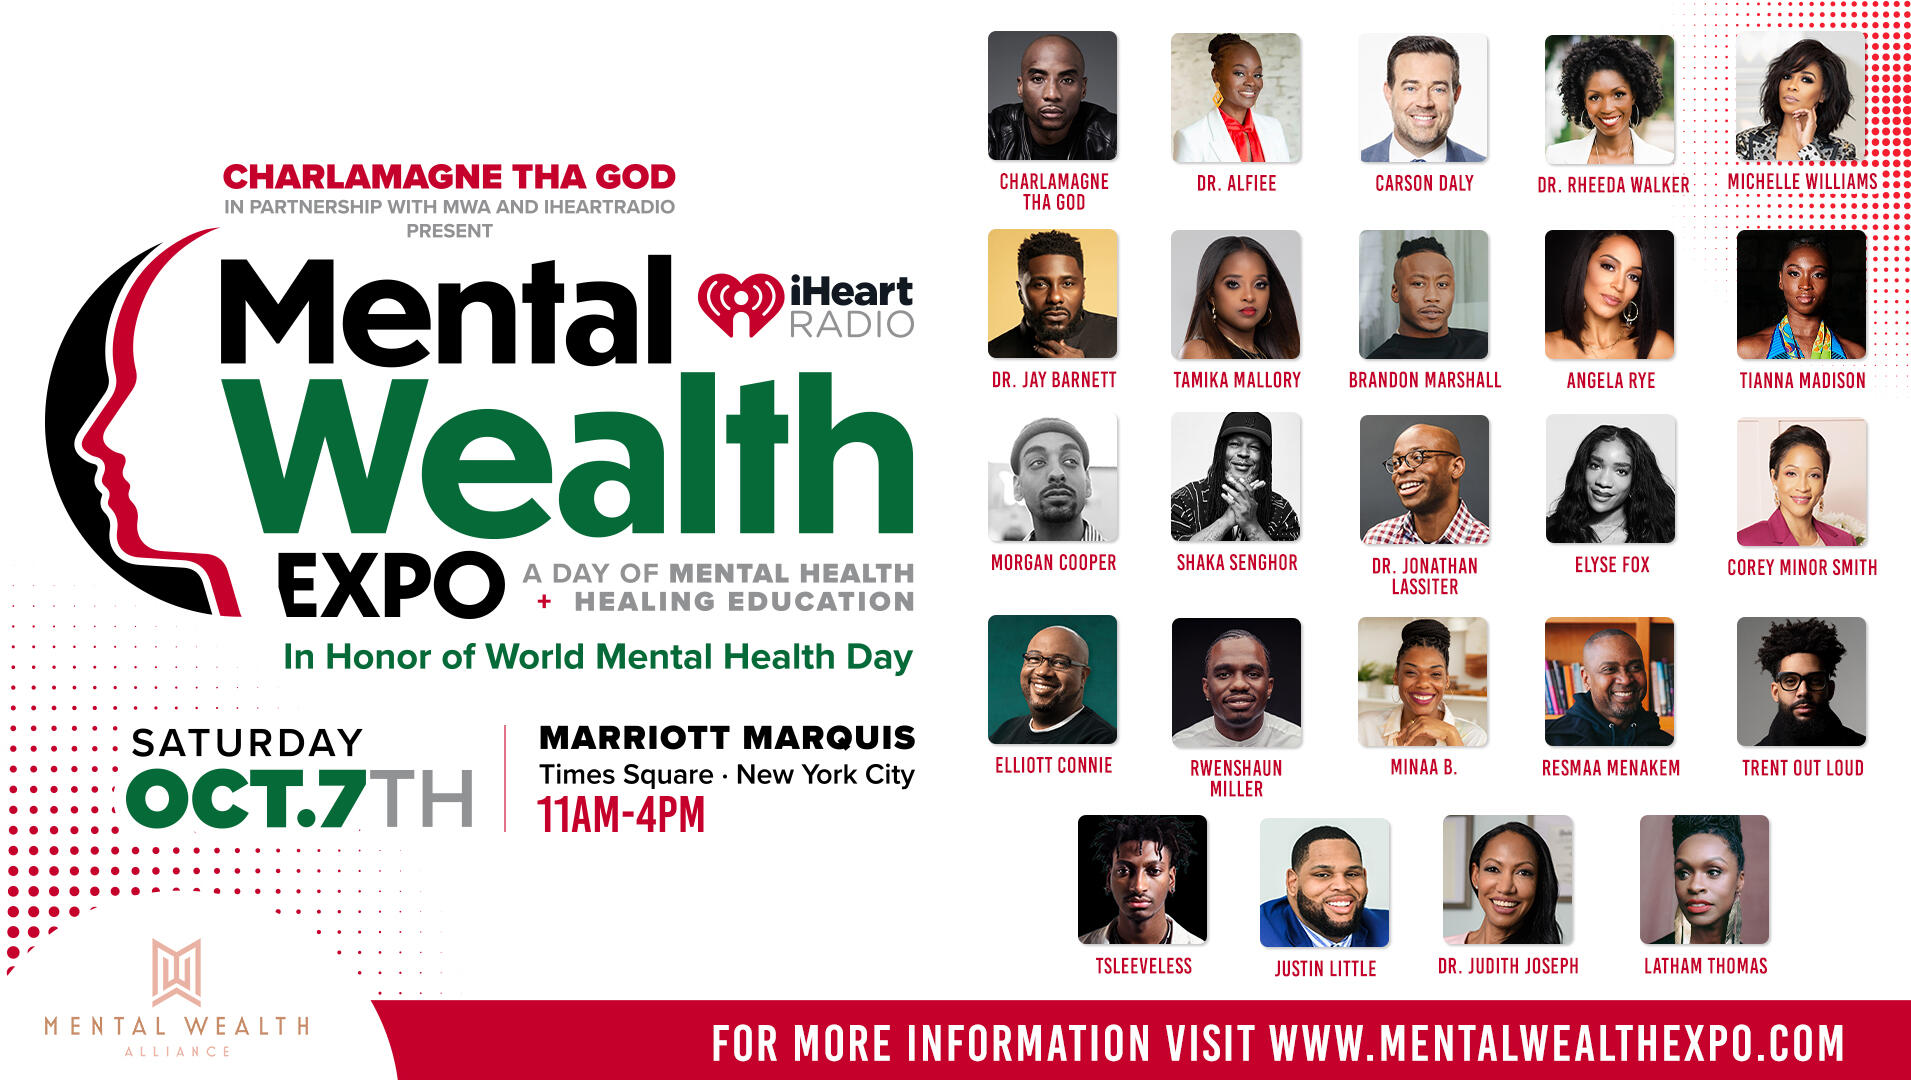 Charlamagne Tha God & Mental Wealth Alliance To Host Mental Wealth Expo 